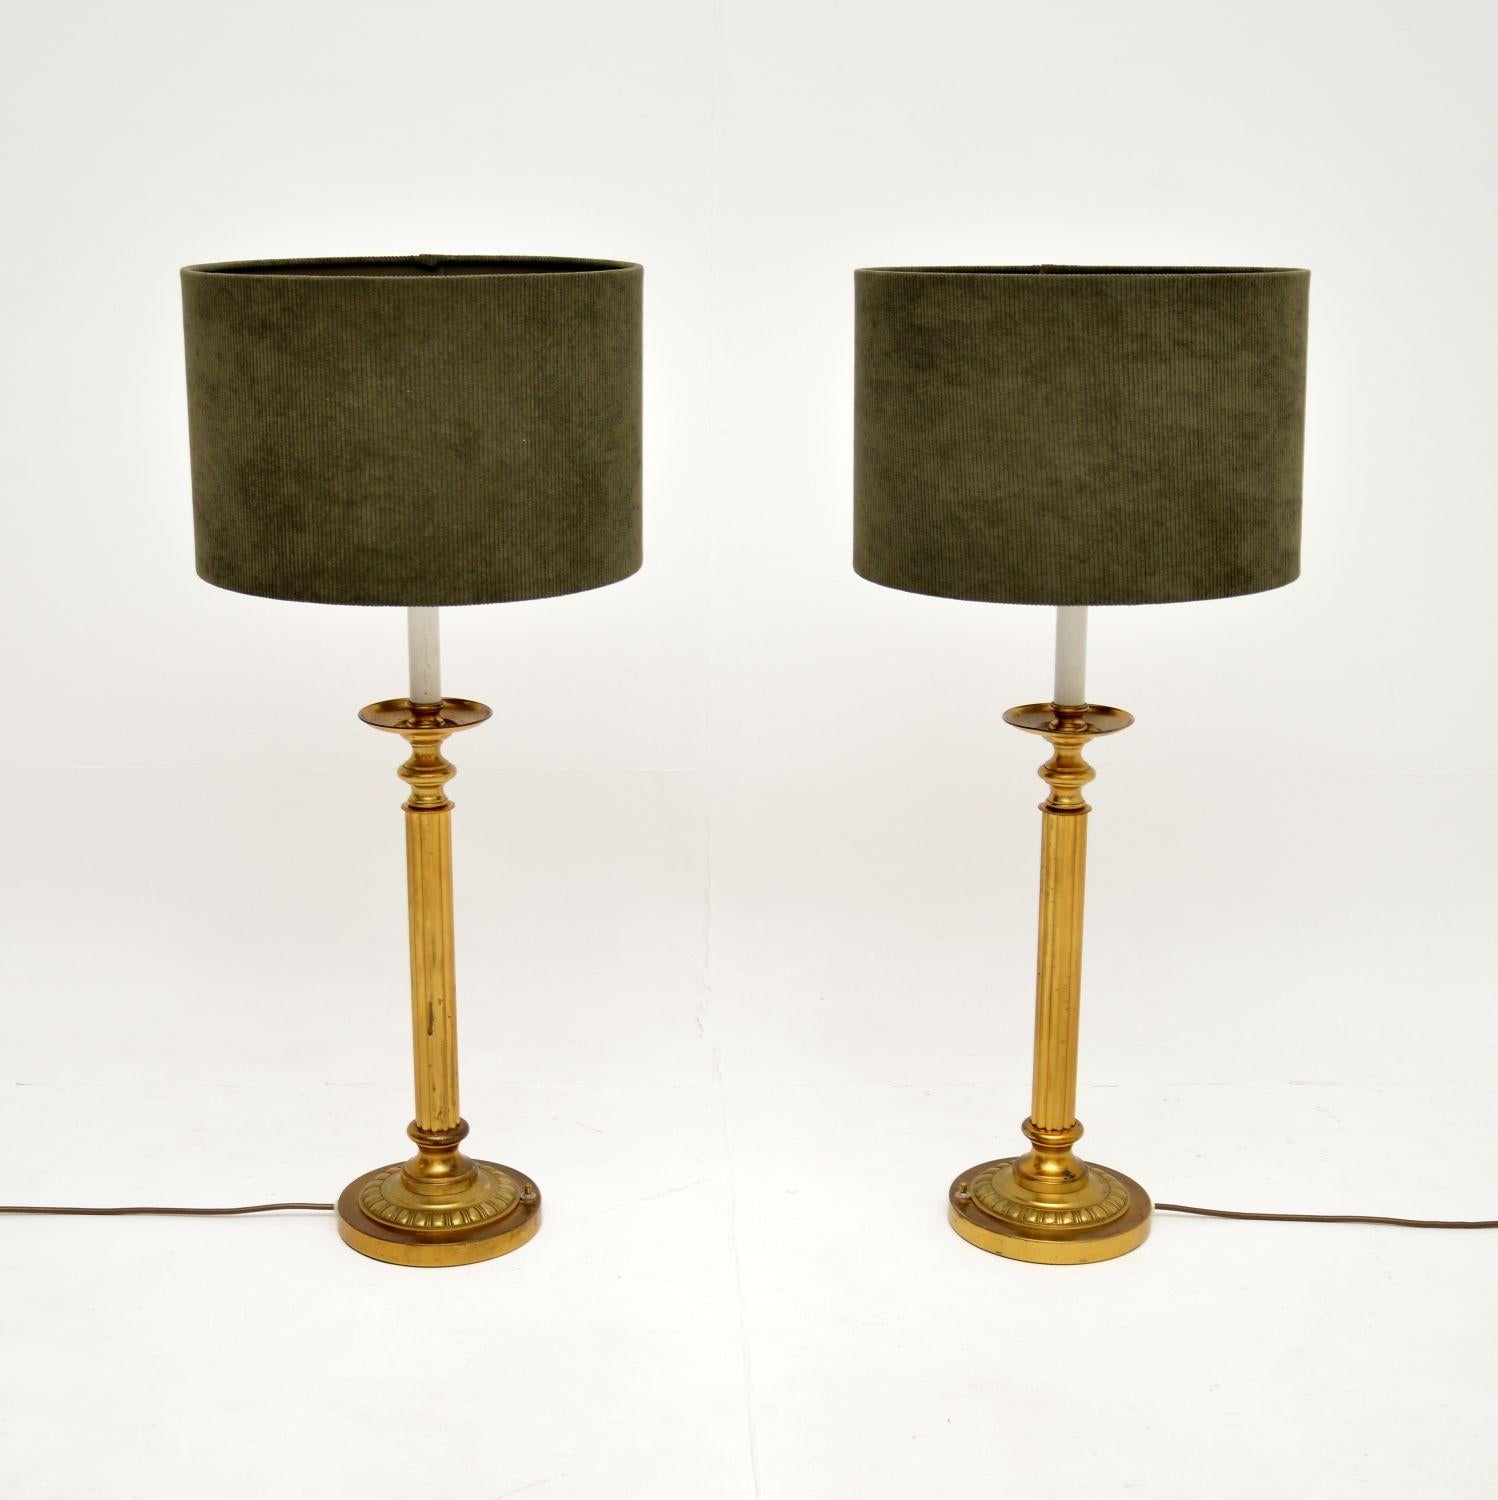 A beautiful and impressive pair of antique fluted brass table lamps. They were made in England, we would date them to around the 1920-30’s.

They are a great size, tall and striking, the quality is amazing. They are designed in the image of